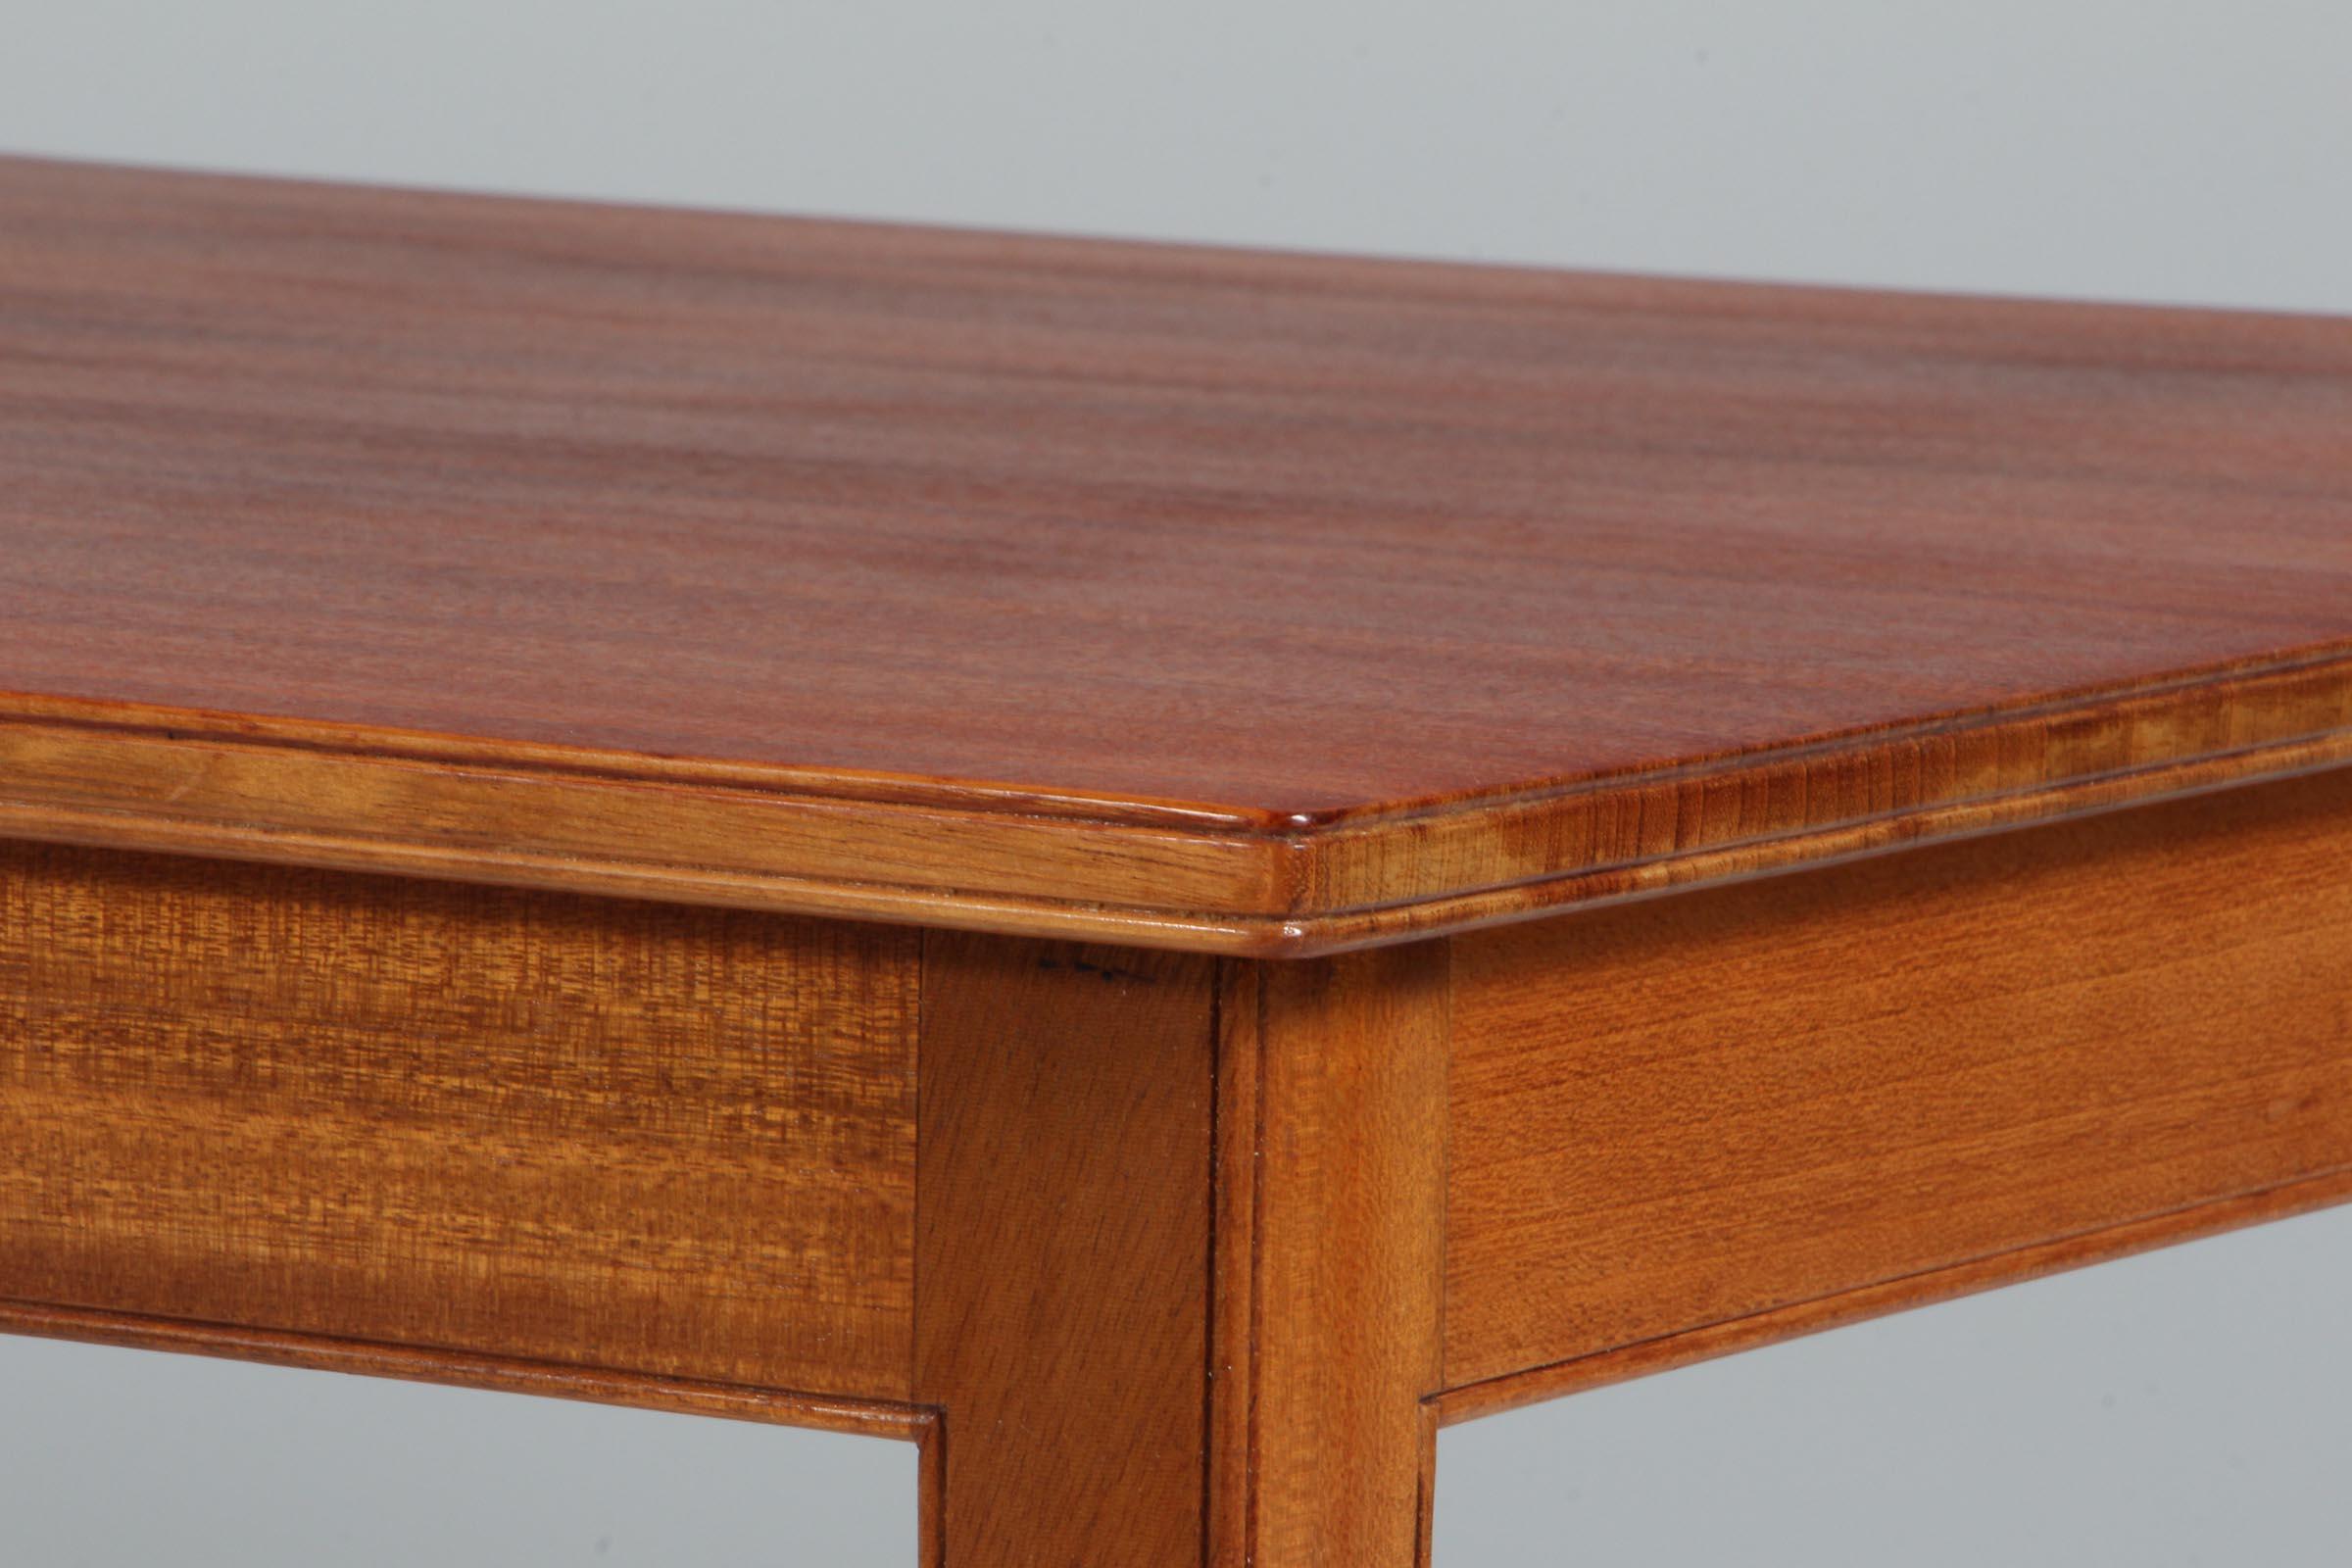 Kaare Klint Sofa Table, Cuba Mahogany In Good Condition For Sale In Esbjerg, DK